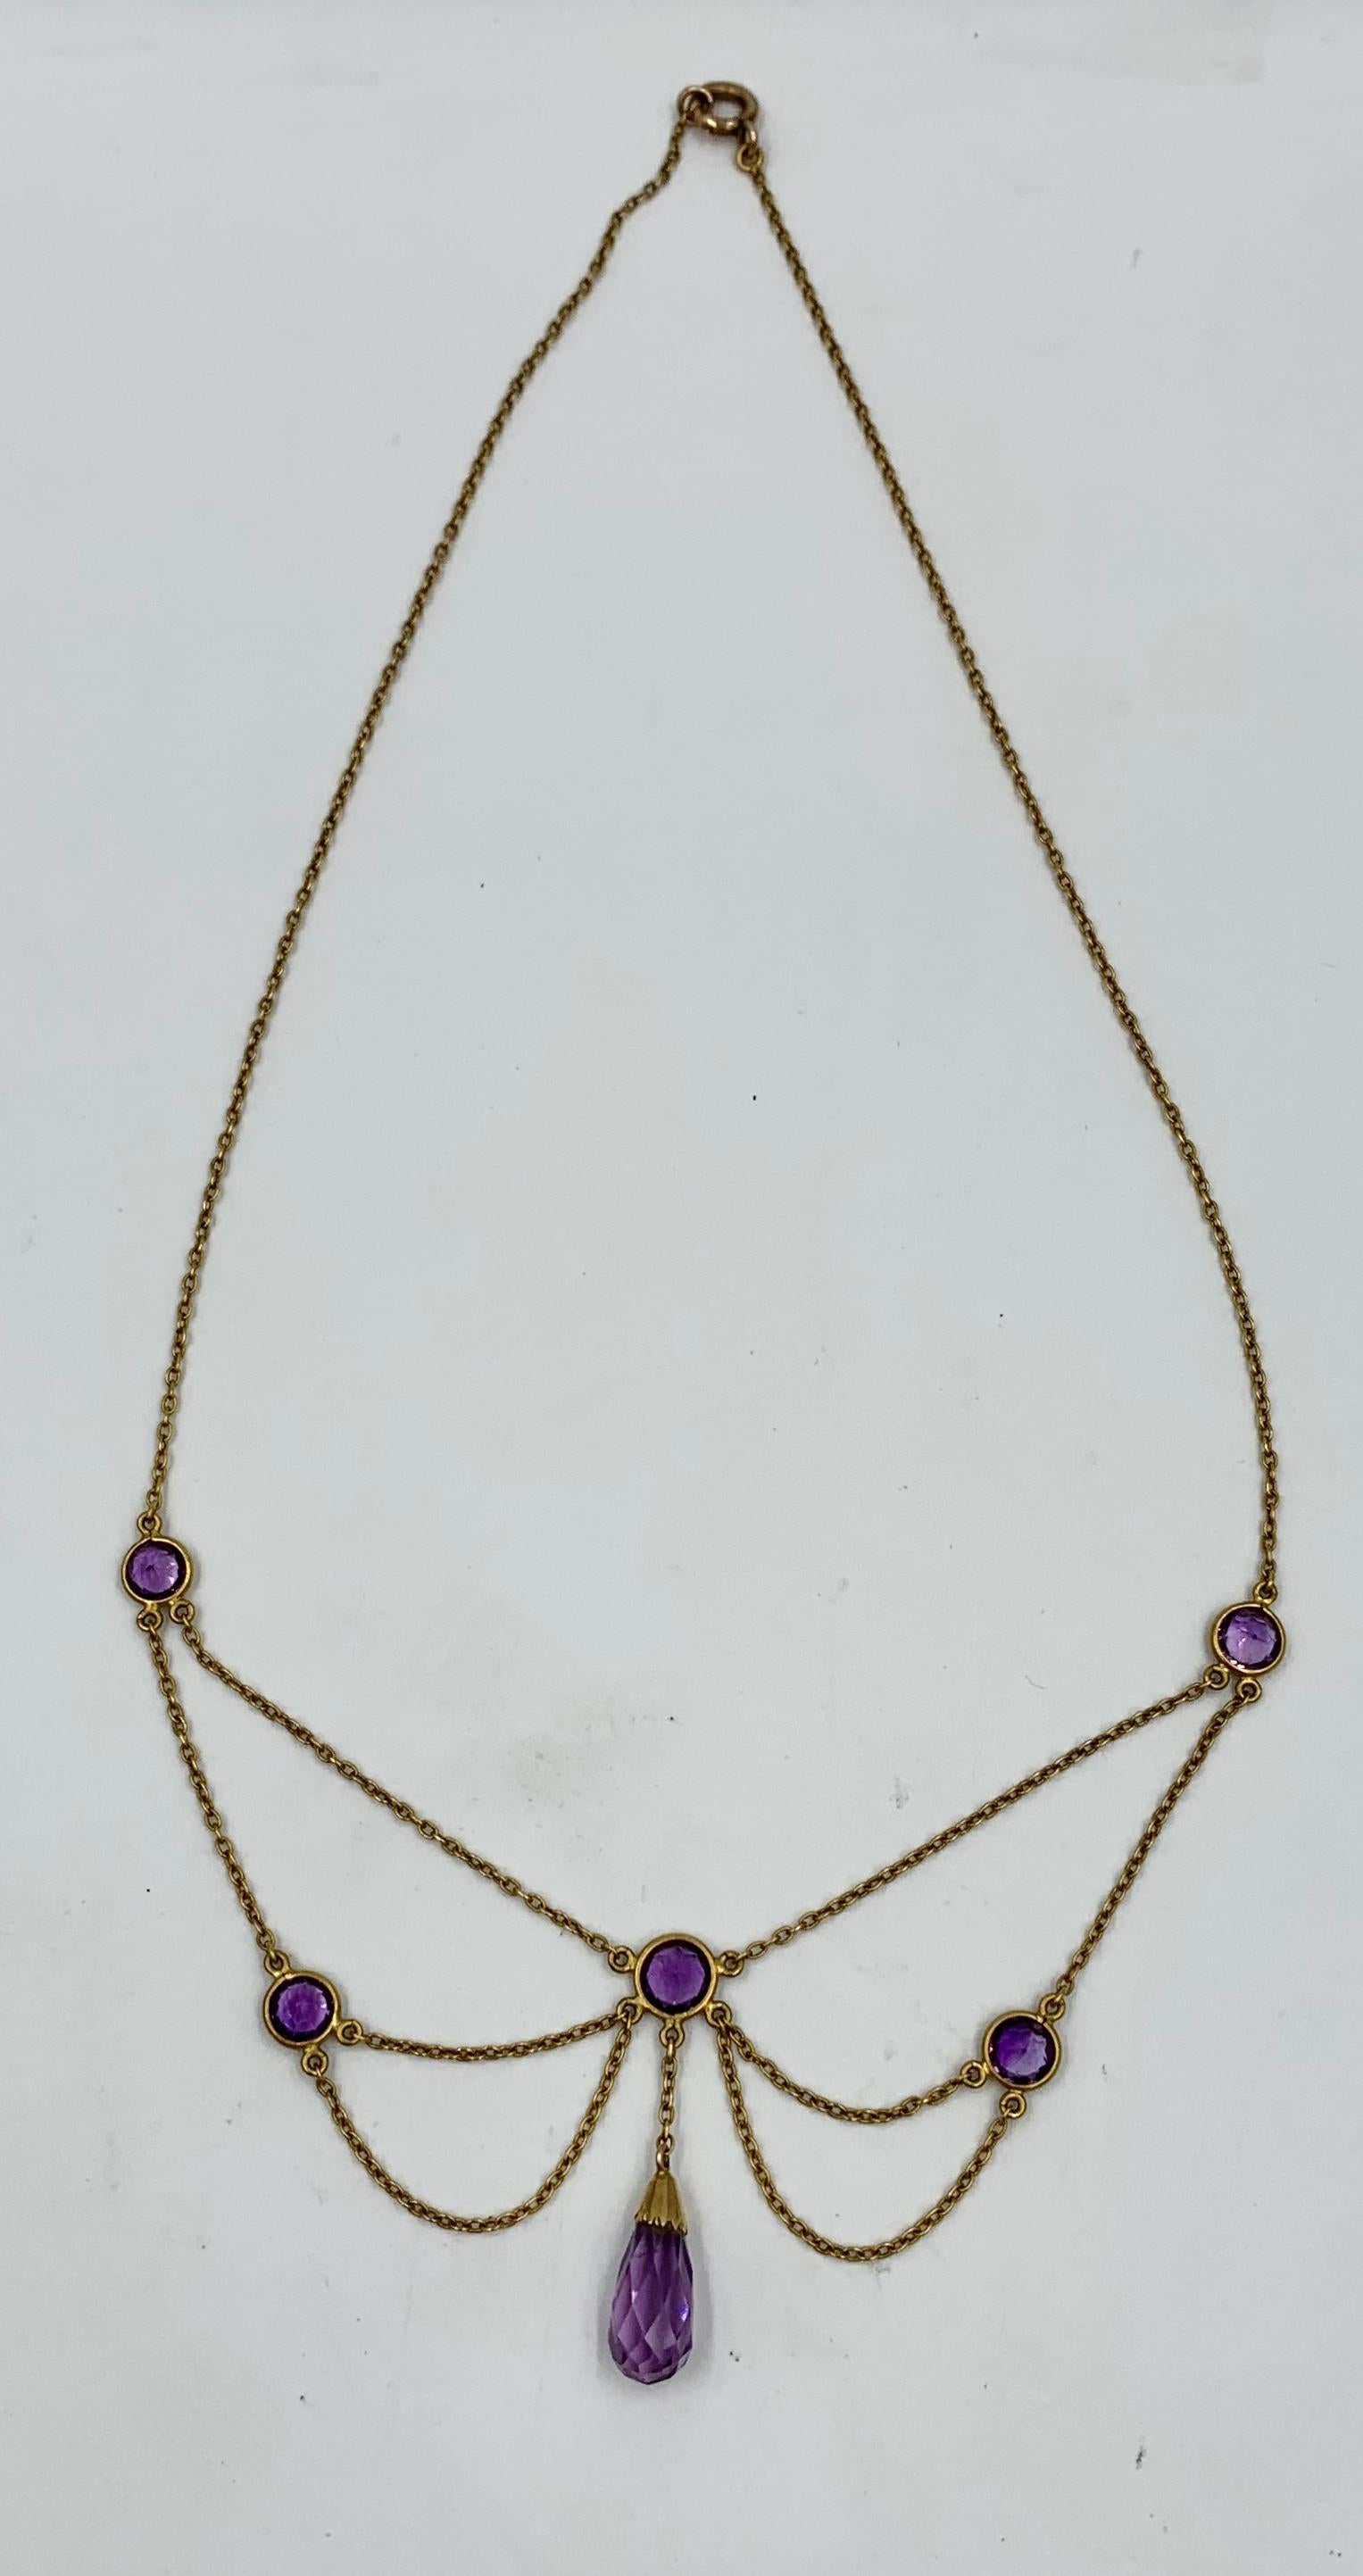 Victorian Siberian Amethyst Festoon Necklace Antique 14 Karat Gold Briolette In Excellent Condition For Sale In New York, NY